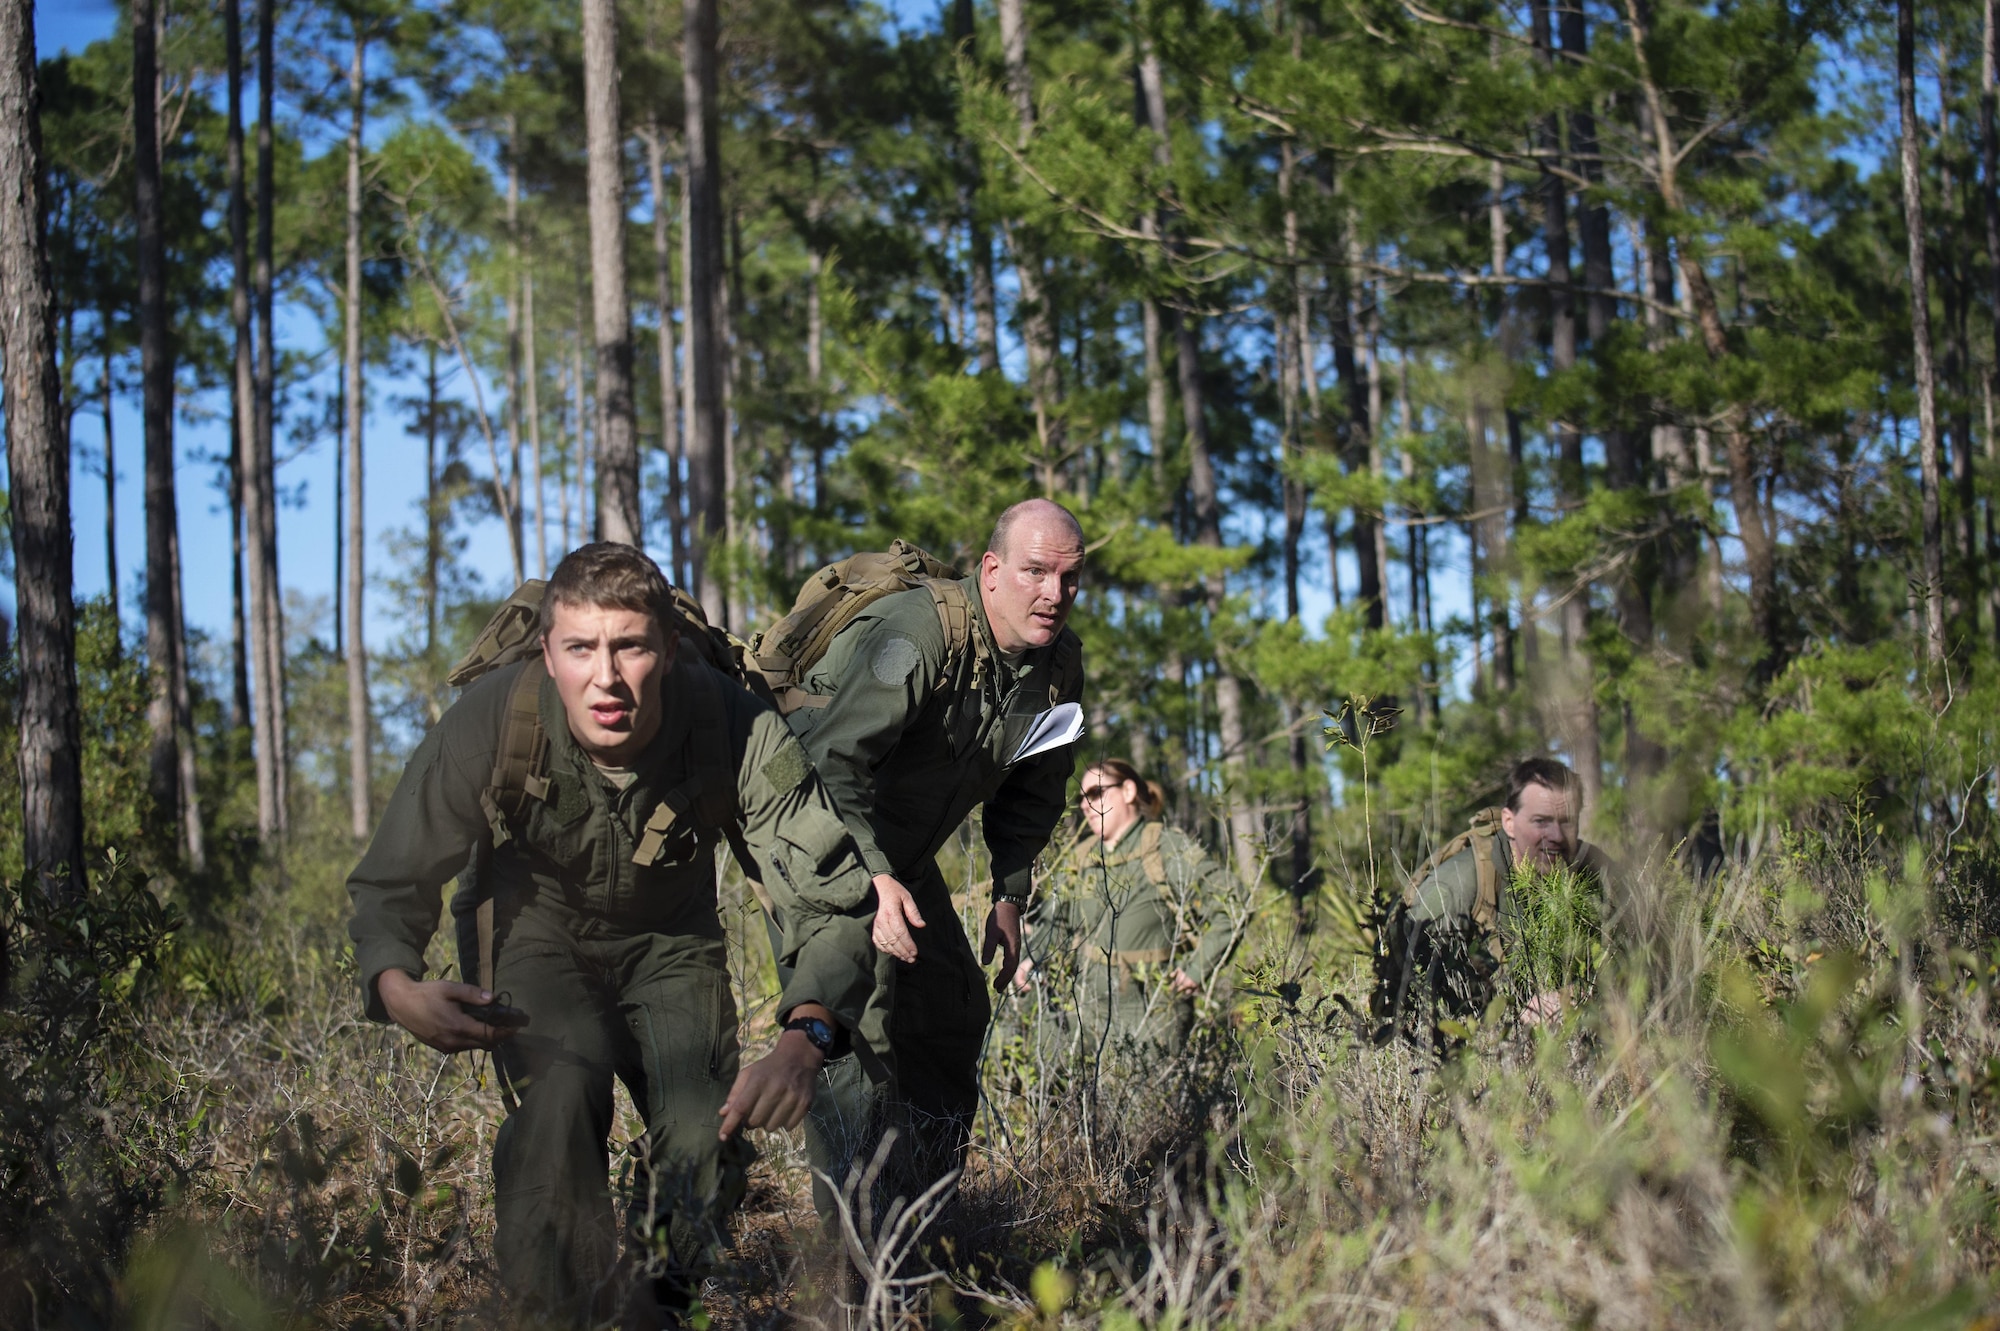 Senior Airman Jake Voshell (left), a loadmaster with the 709th Airlift Squadron, leads his team through the simulated evasion portion of combat training, April 2, 2016, at Naval Air Station Pensacola, Fla. Reservists from Dover Air Force Base, Del., in the 512th Airlift Wing, conducted an off-station training exercise, March 29 to April 3, to ensure they are current in all their deployment requirements. (U.S. Air Force photo/Capt. Bernie Kale)